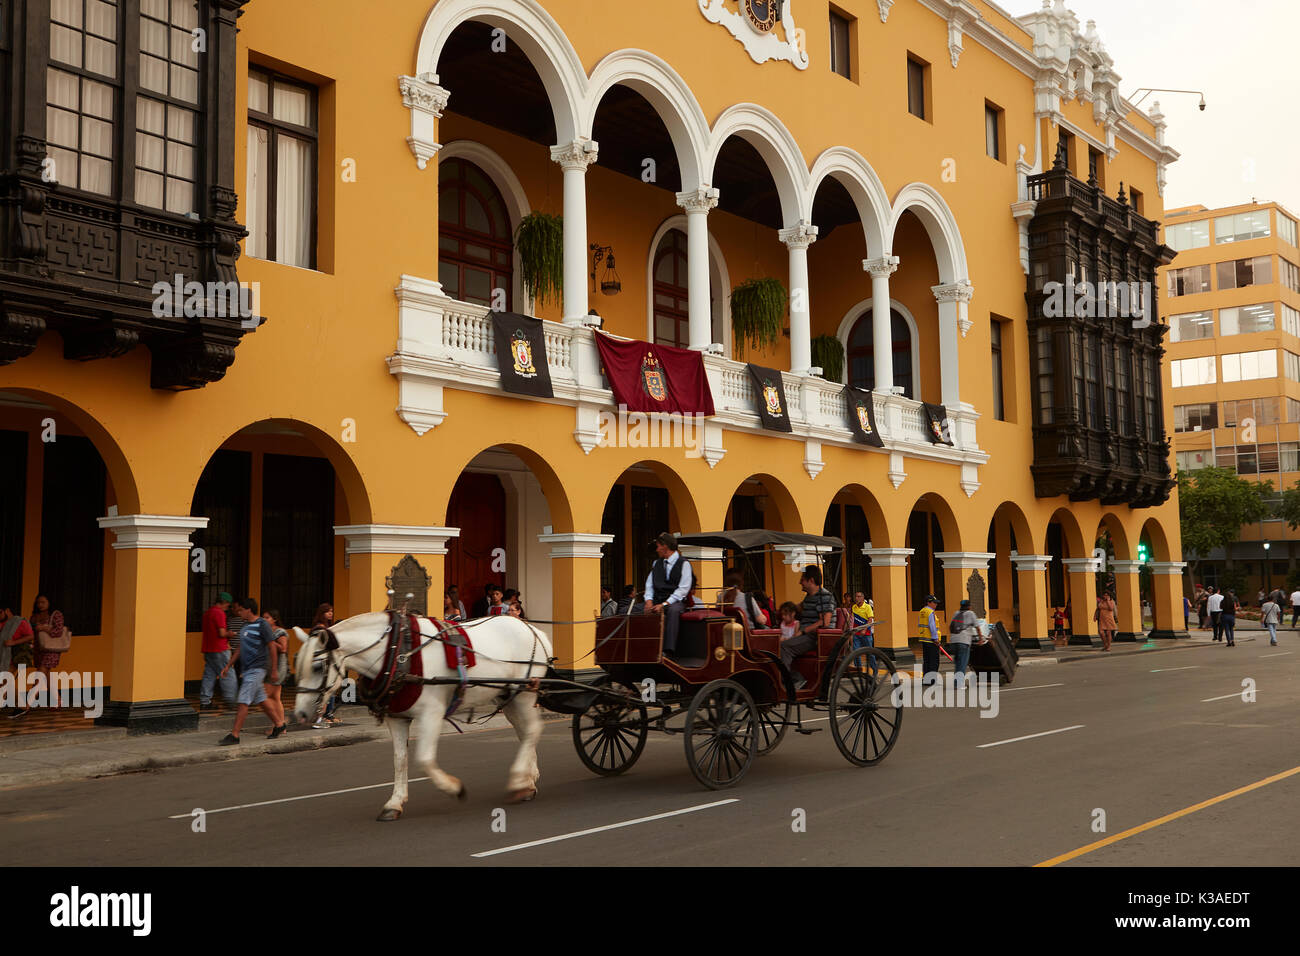 Horse and cart, in front of Municipal Palace of Lima, Plaza Mayor, Historic centre of Lima (World Heritage Site), Peru, South America Stock Photo